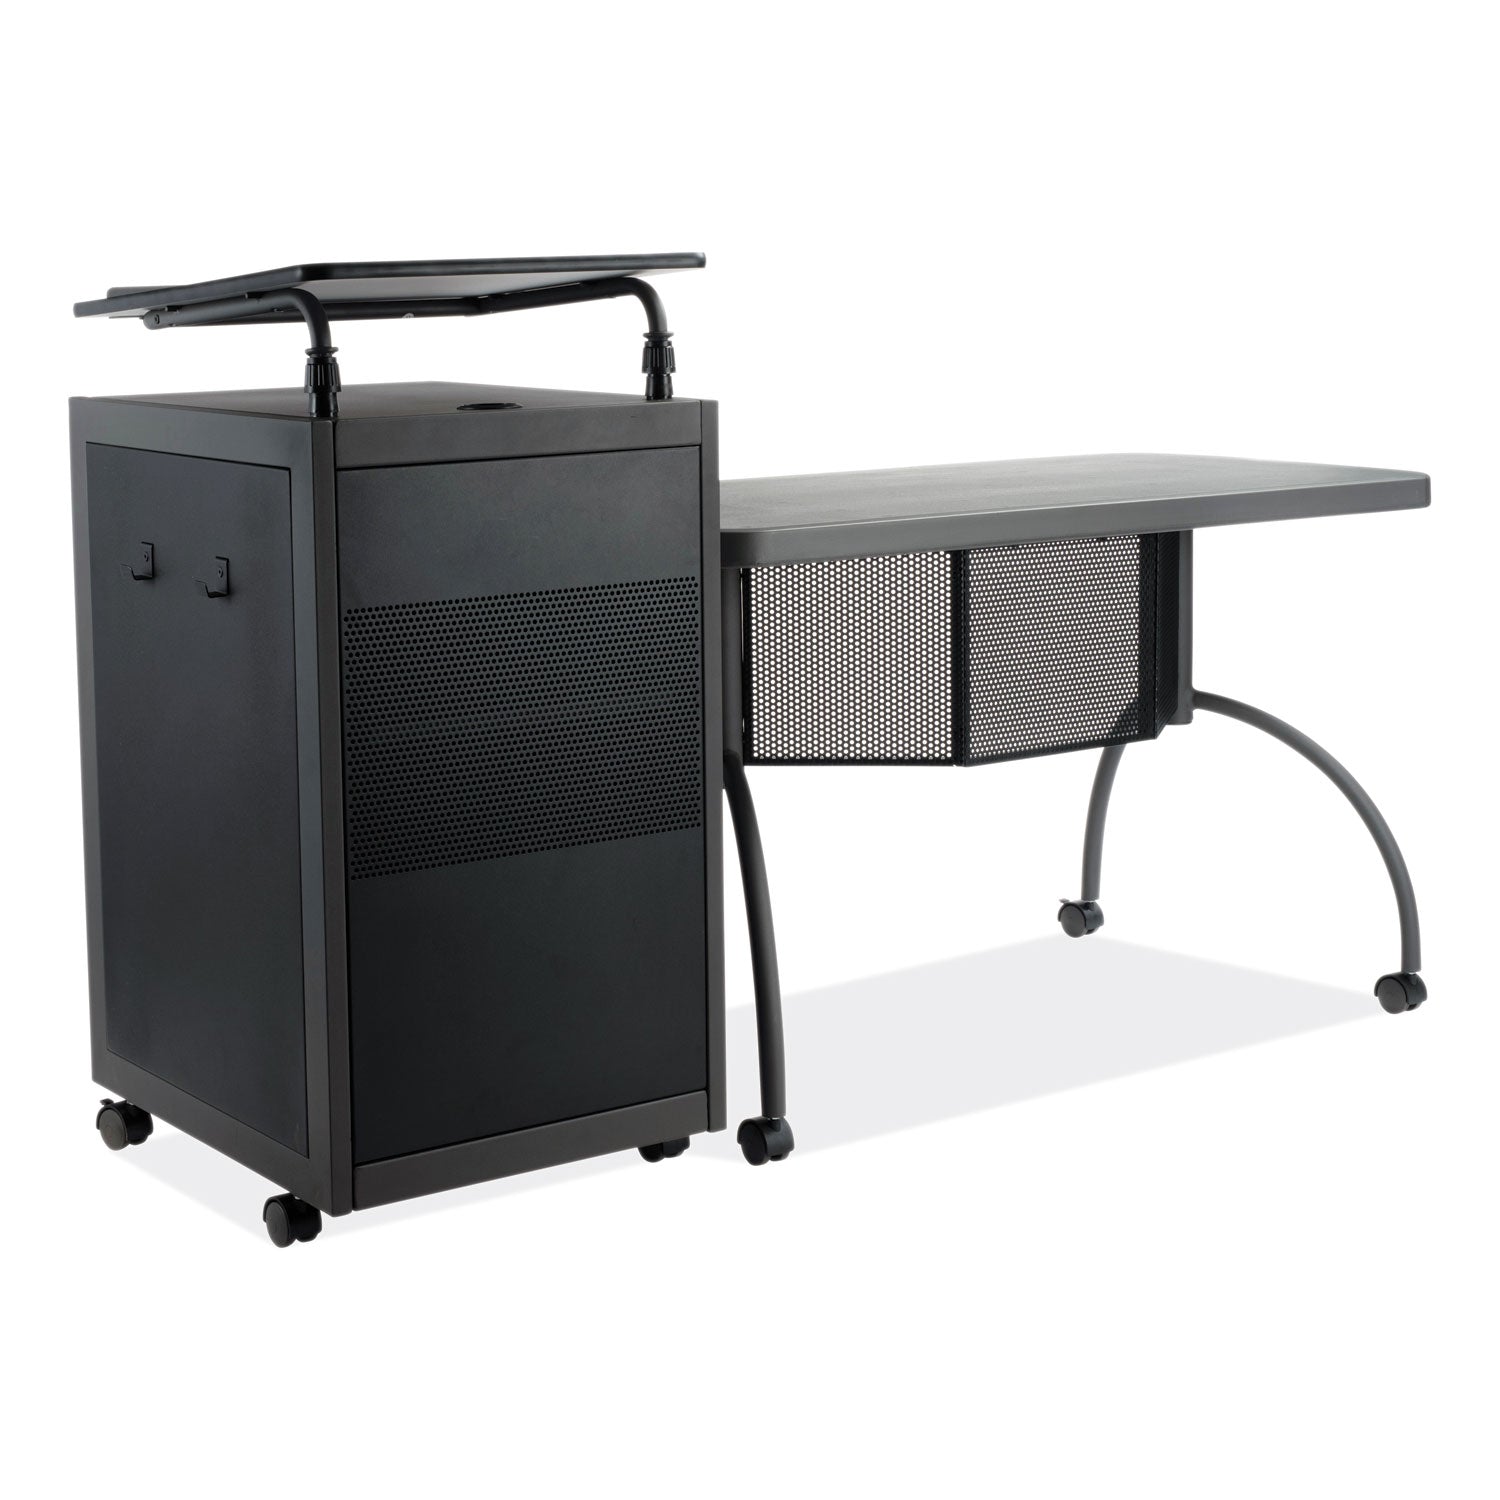 teachers-workpod-desk-and-lectern-kit-68-x-24-x-41-charcoal-gray-ships-in-1-3-business-days_npstwp - 2